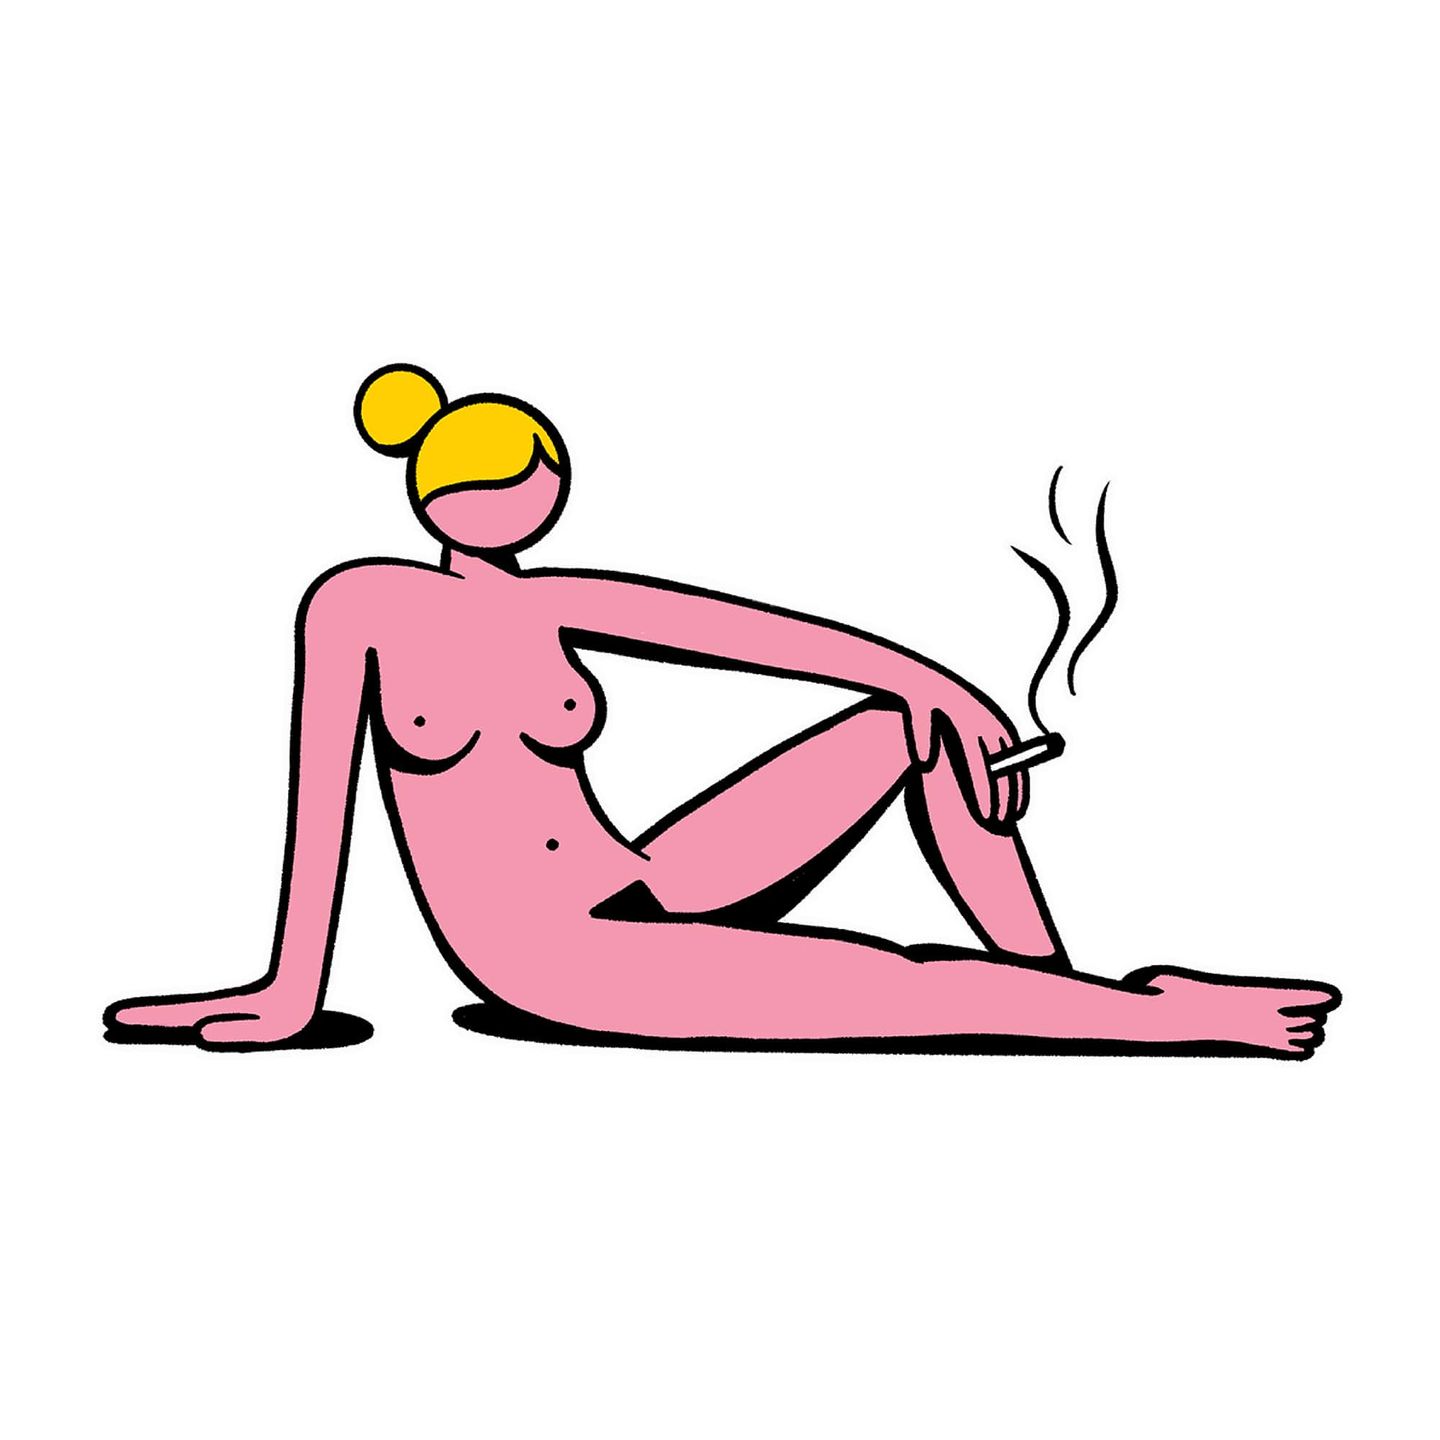 Naked woman is posing with a cigarette.